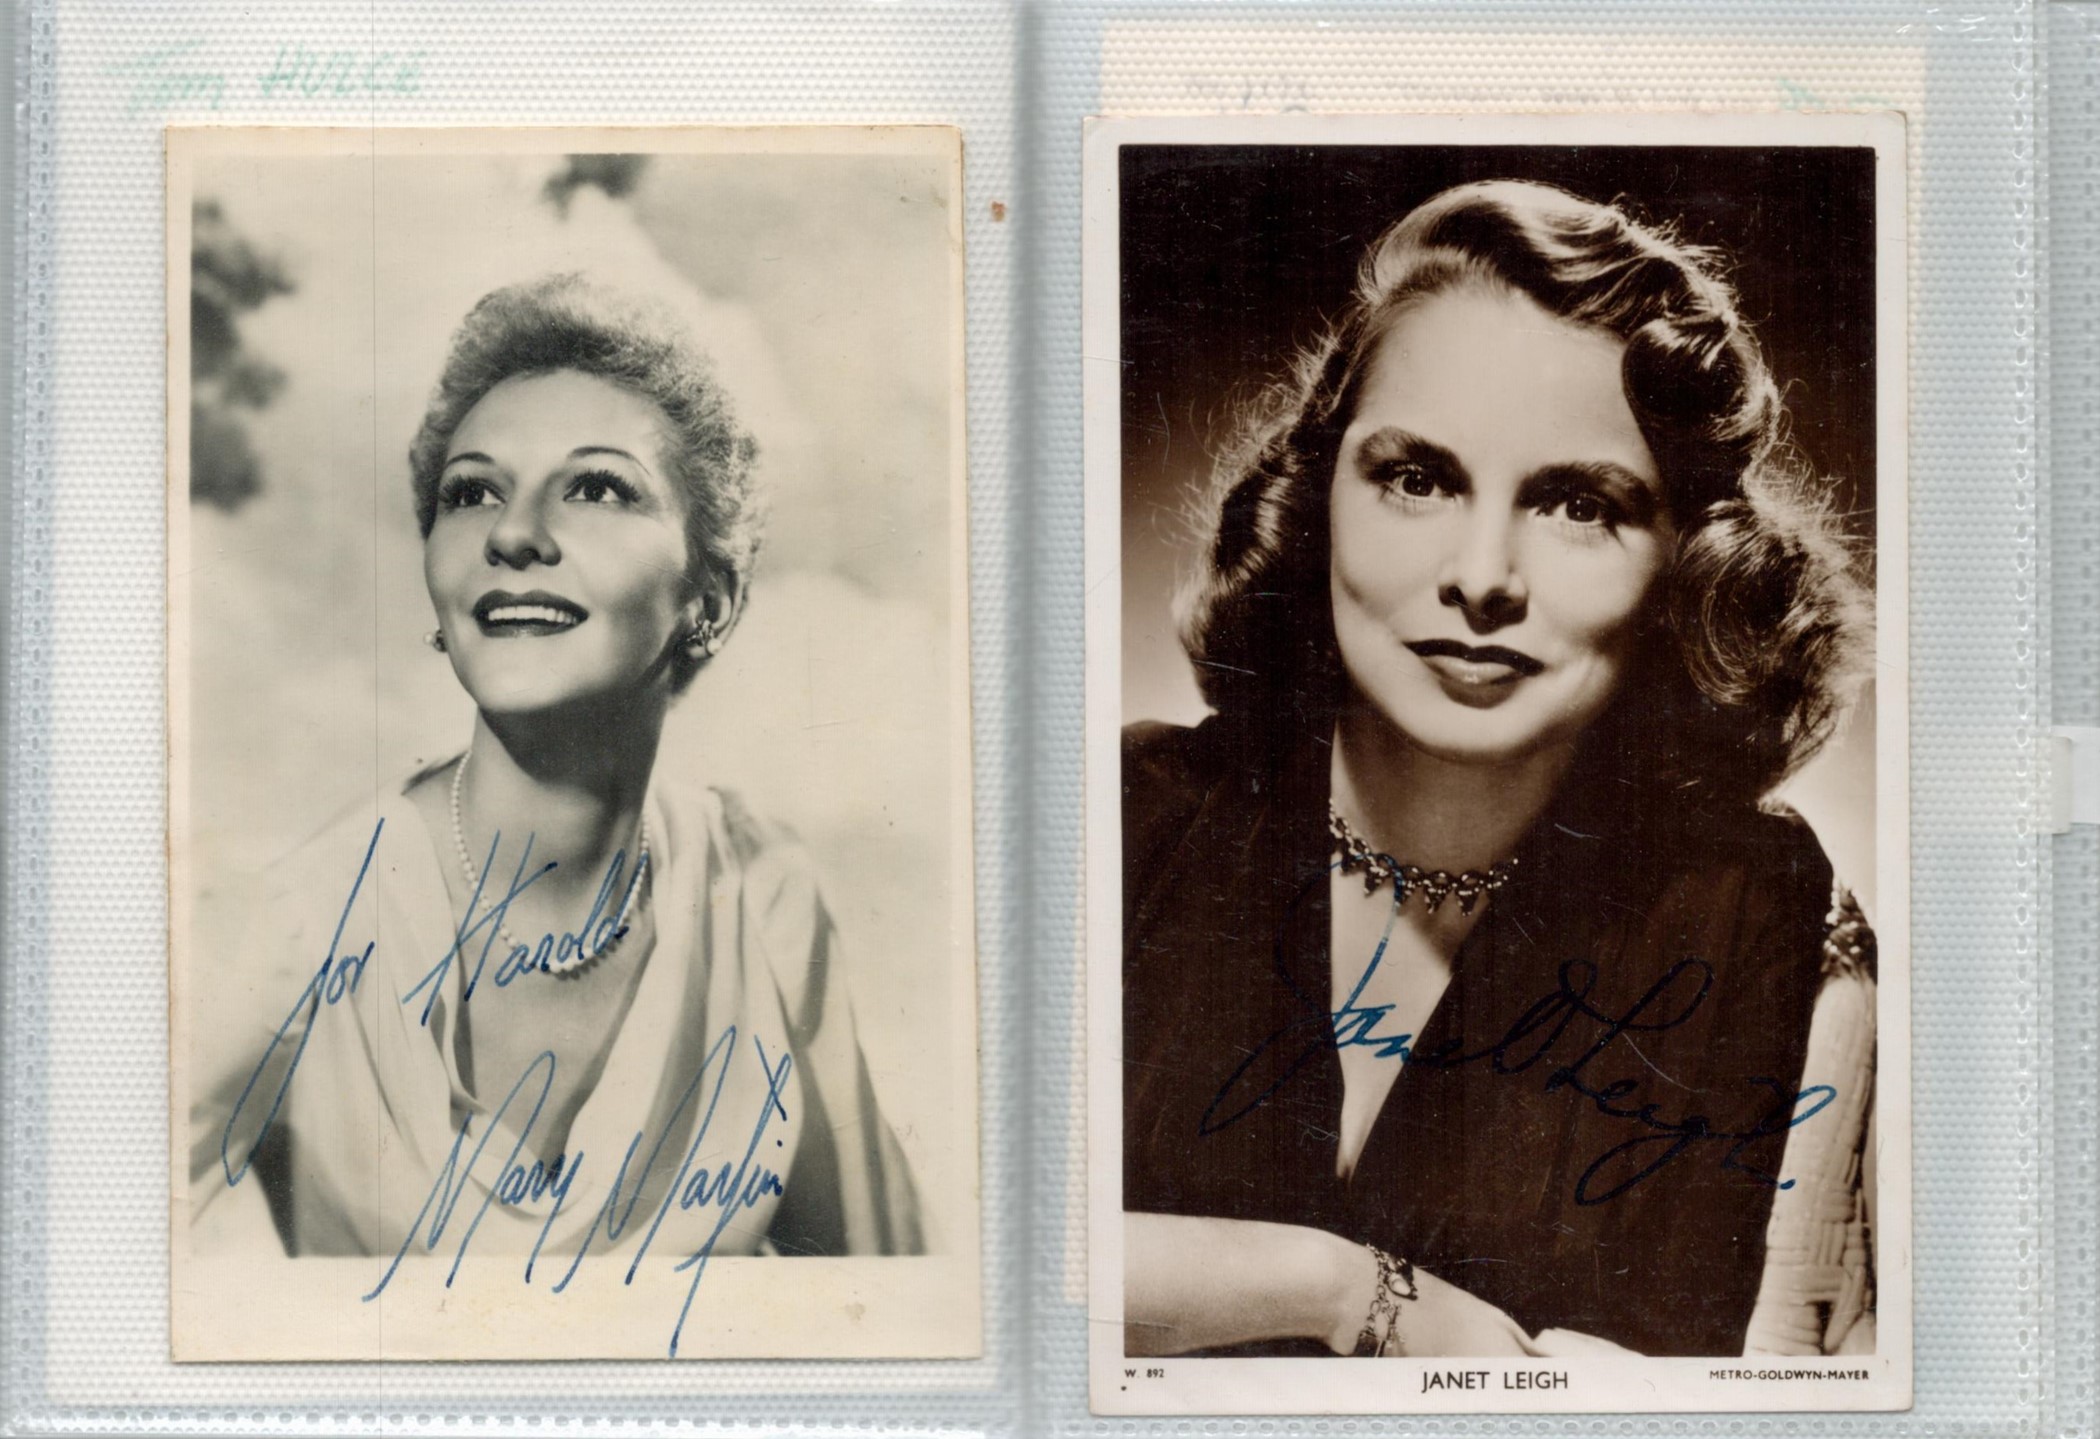 TV And Film Collection of 41 Signed Small Photos Housed in an Aged Album. Signatures include Carol